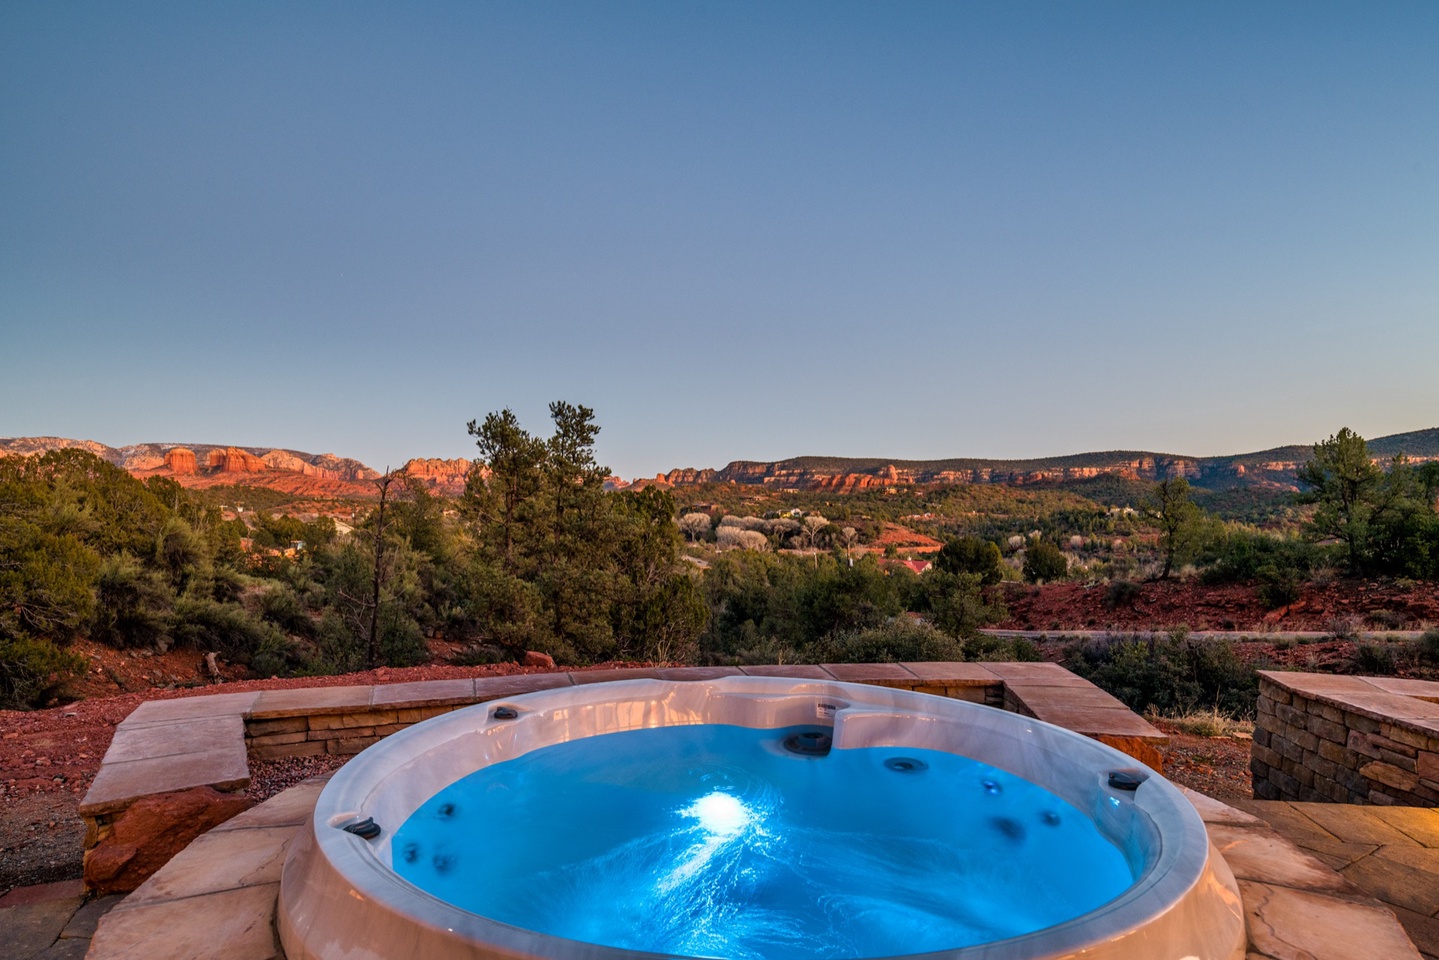 Soak in the spa overlooking the Sedona canyons